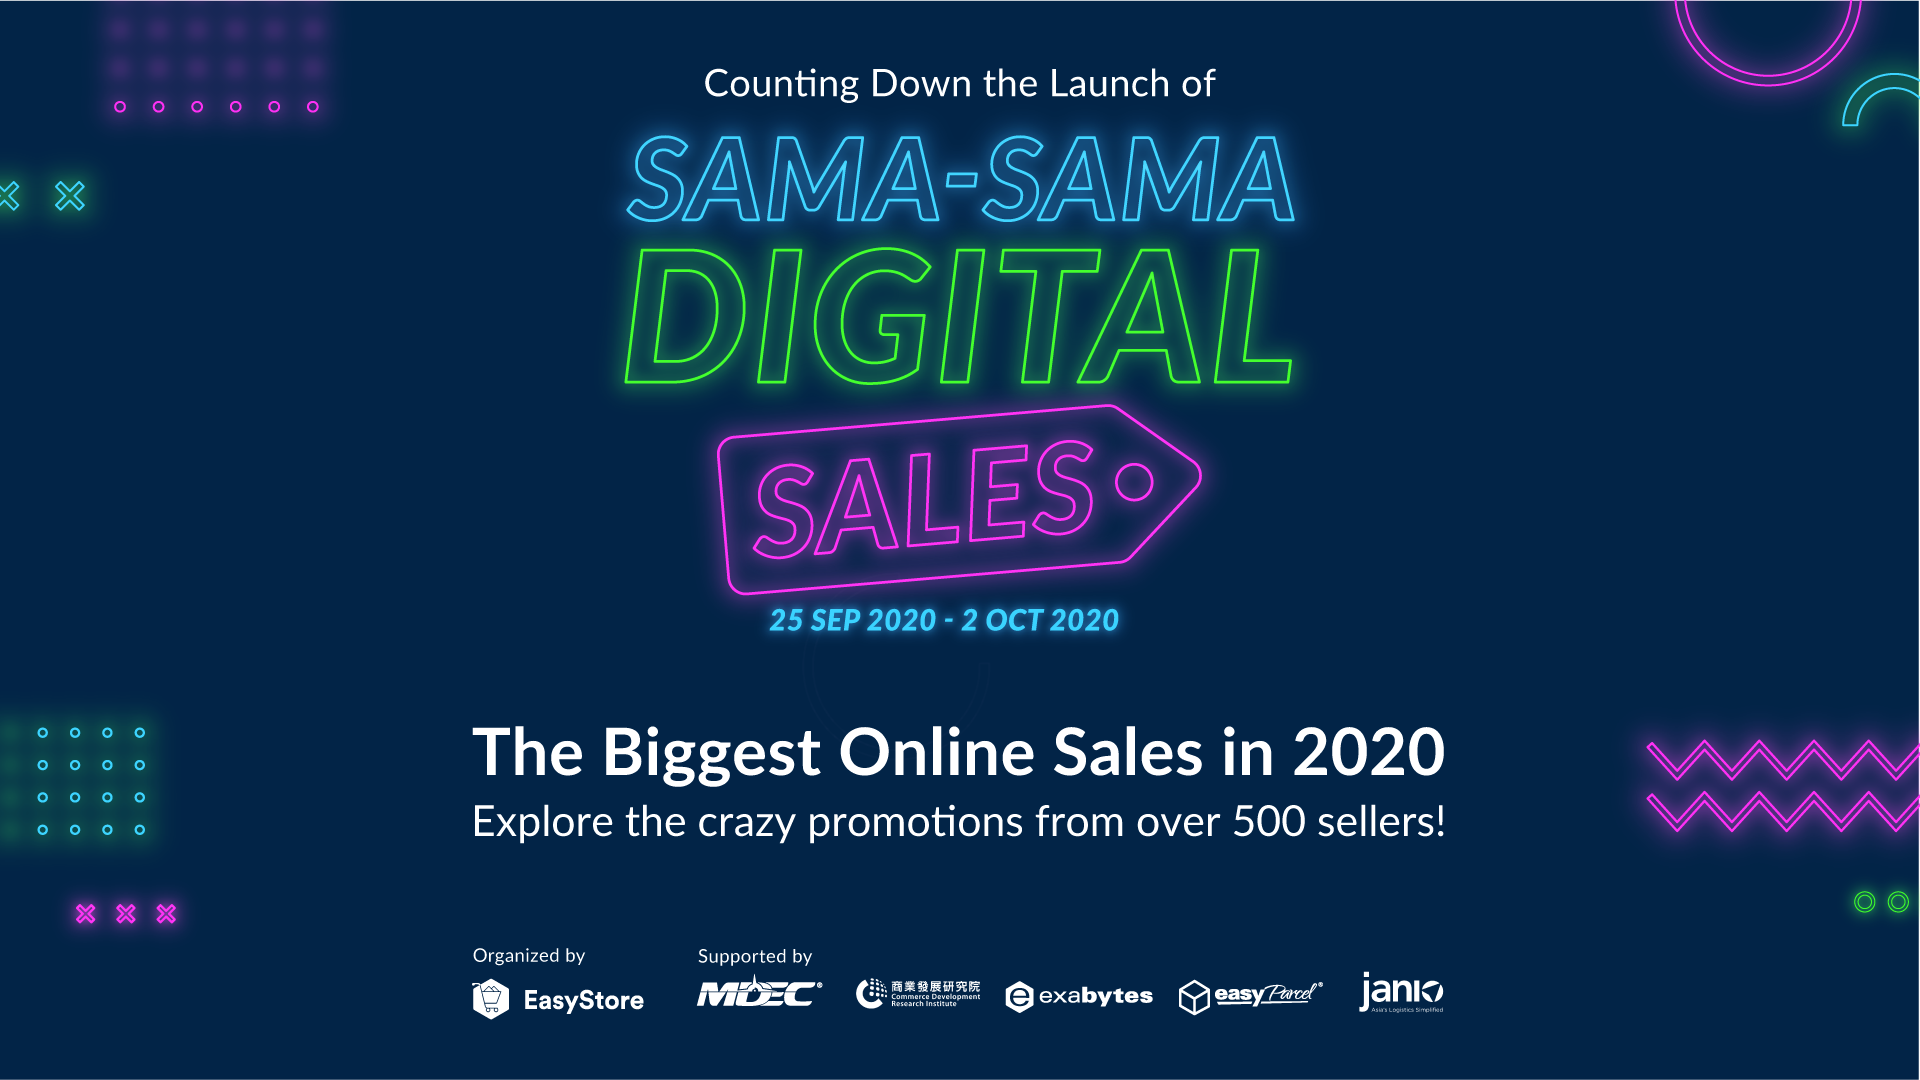 List Your Crazy Promotions on this Sama-sama Digital Sales! | EasyStore